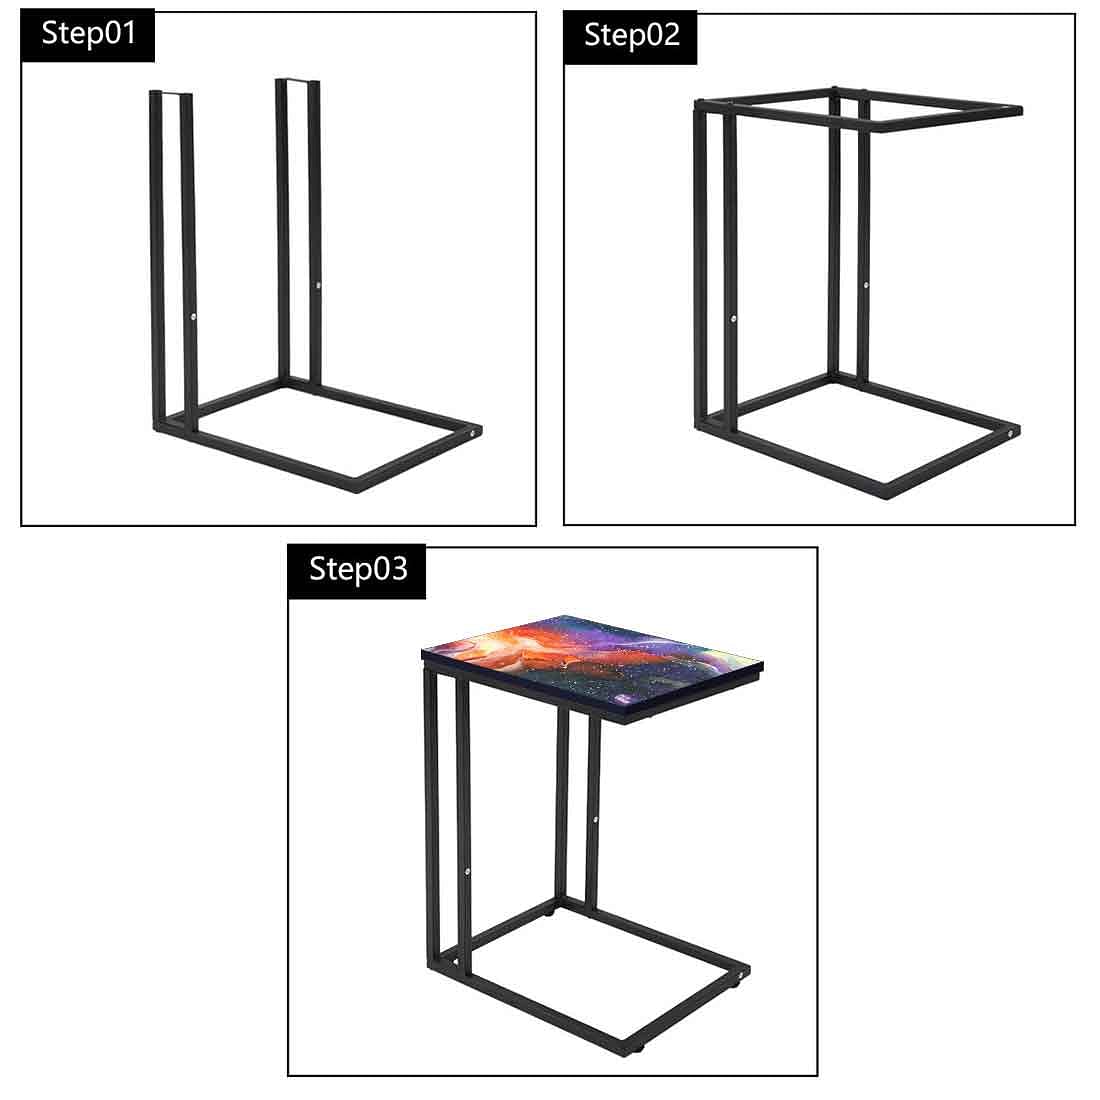 Beautiful C Shaped End Table - Space Multi Watercolor Nutcase